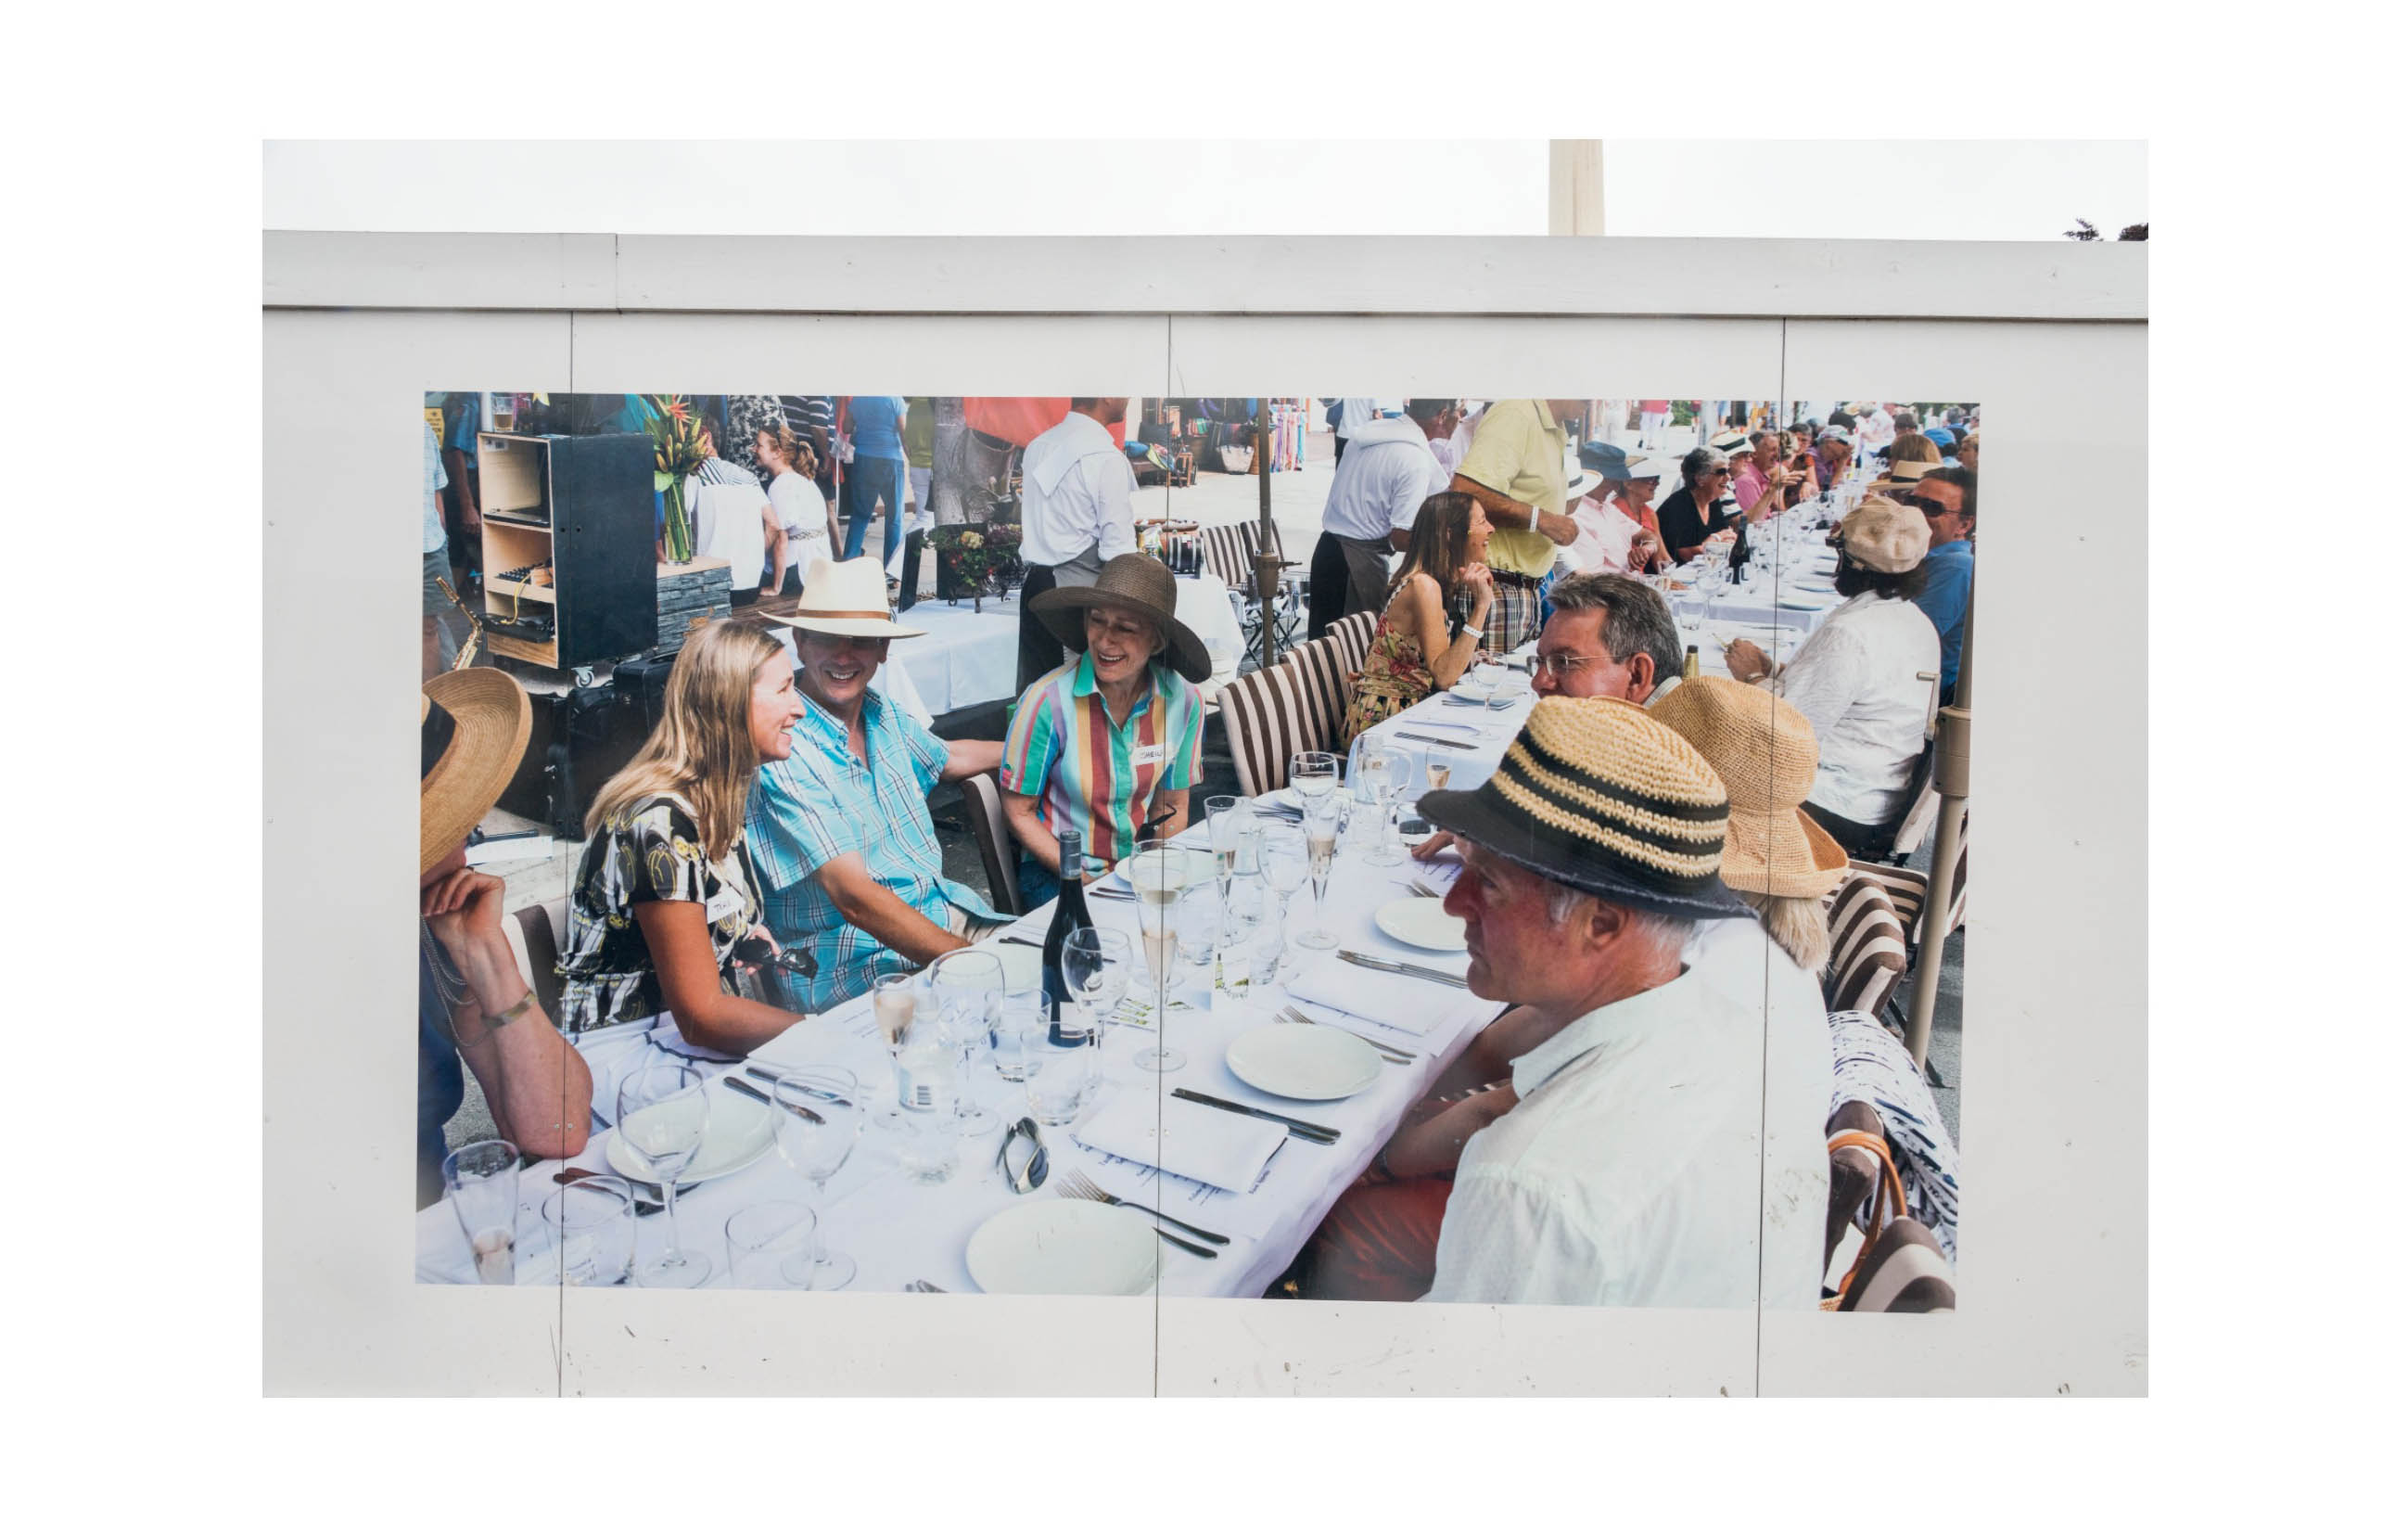 A hoarding shows a large outdoor dinner party with middle class white people